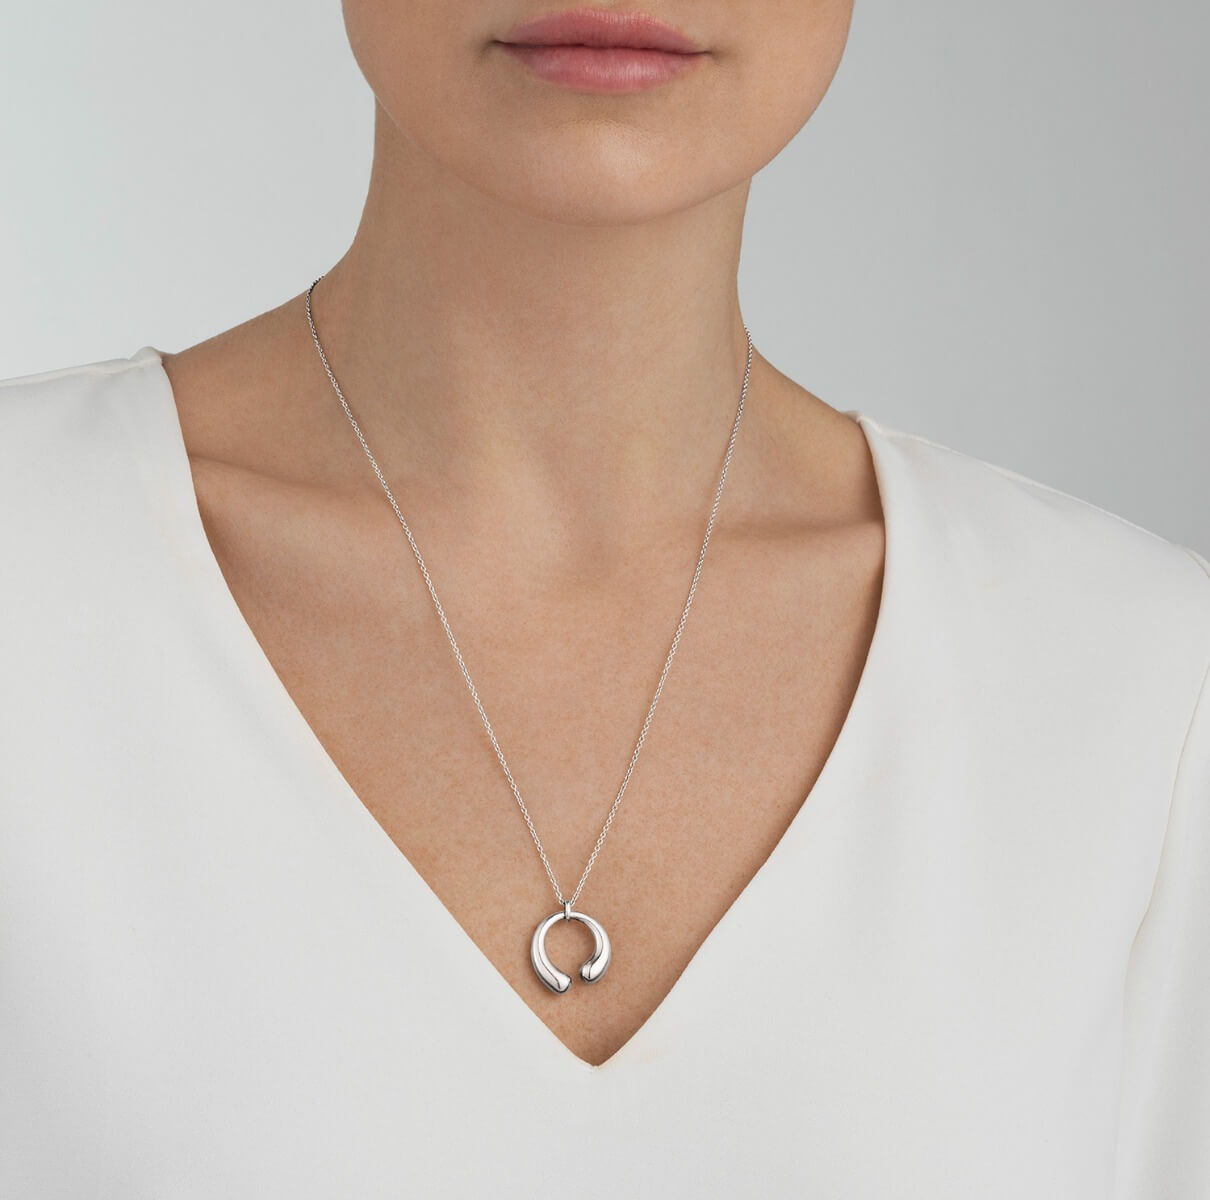 georg jensen mercy silver pendant and chain 10015156